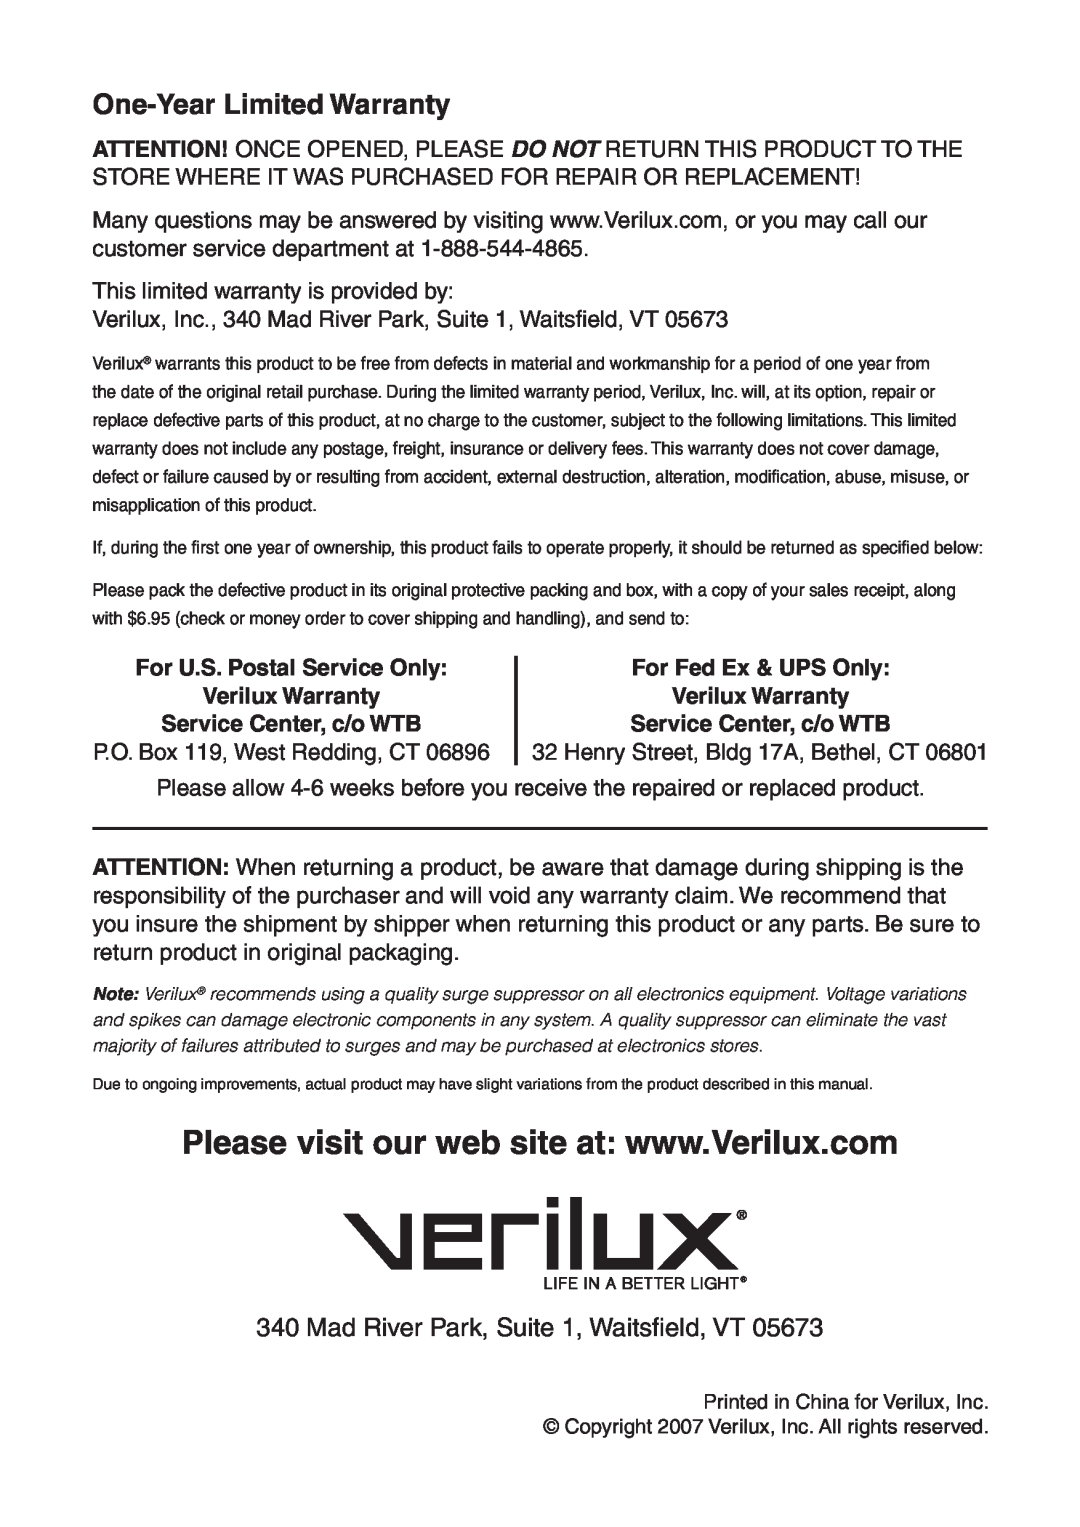 Verilux VF04 manual One-YearLimited Warranty, Mad River Park, Suite 1, Waitsﬁeld, VT, Service Center, c/o WTB 